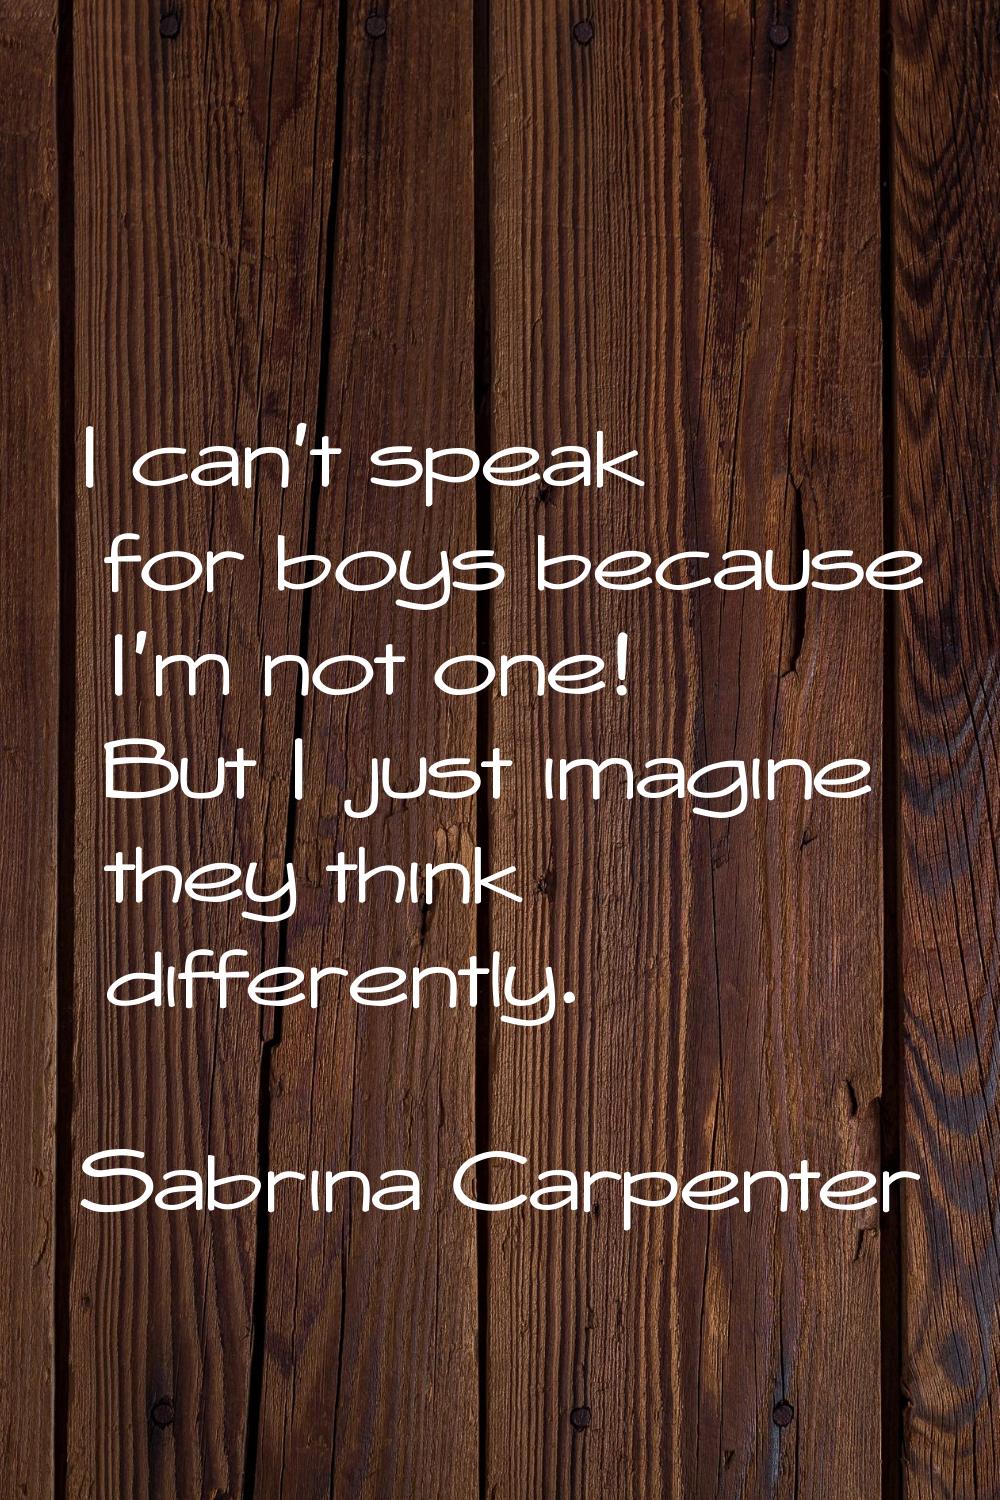 I can't speak for boys because I'm not one! But I just imagine they think differently.